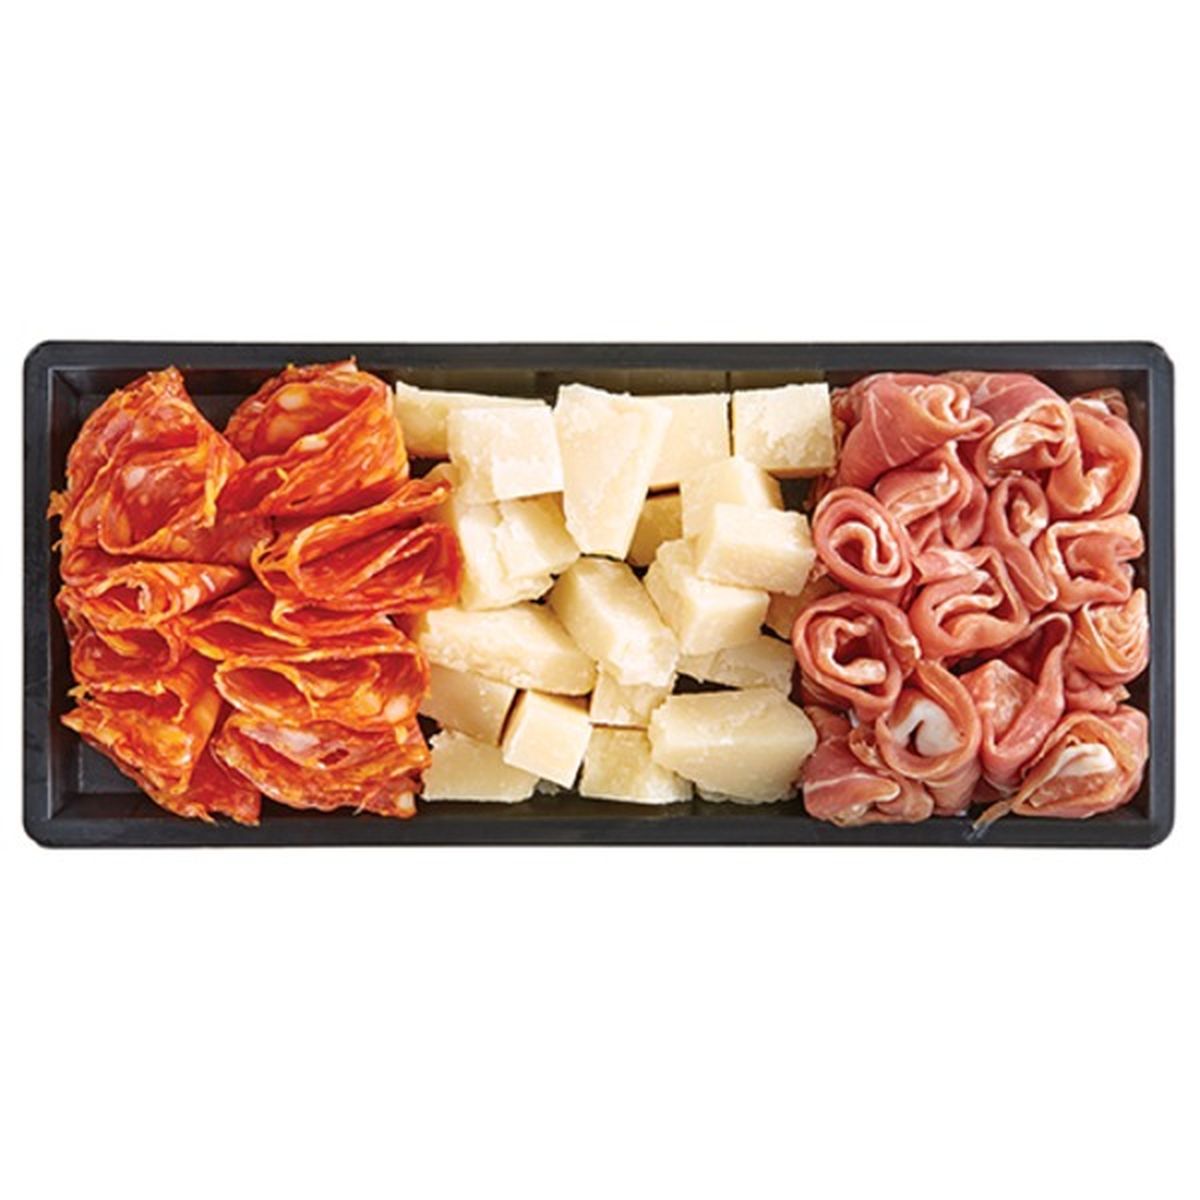 Calories in Wegmans Chef's Selection Charcuterie Tray, Appetizer